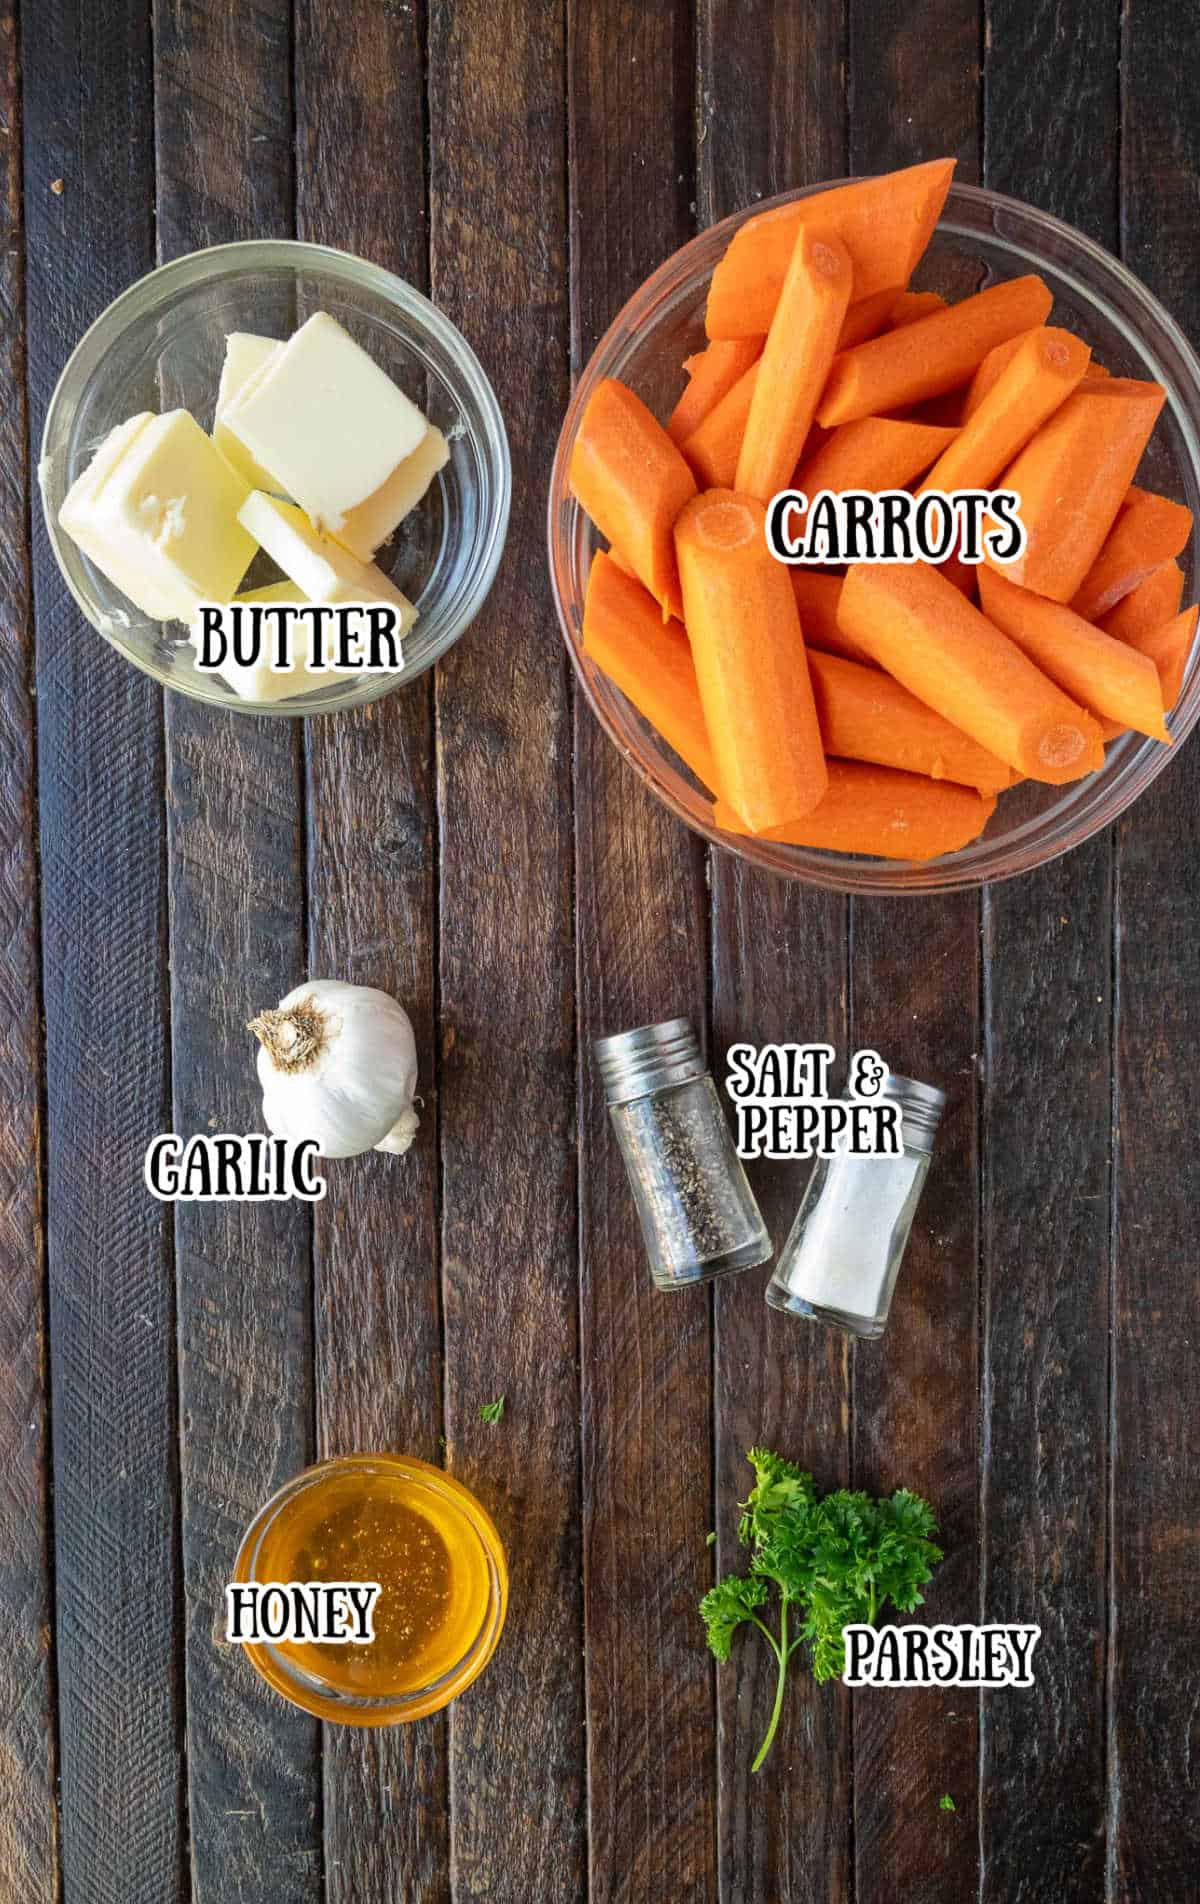 All the ingredients needed for these honey carrots.